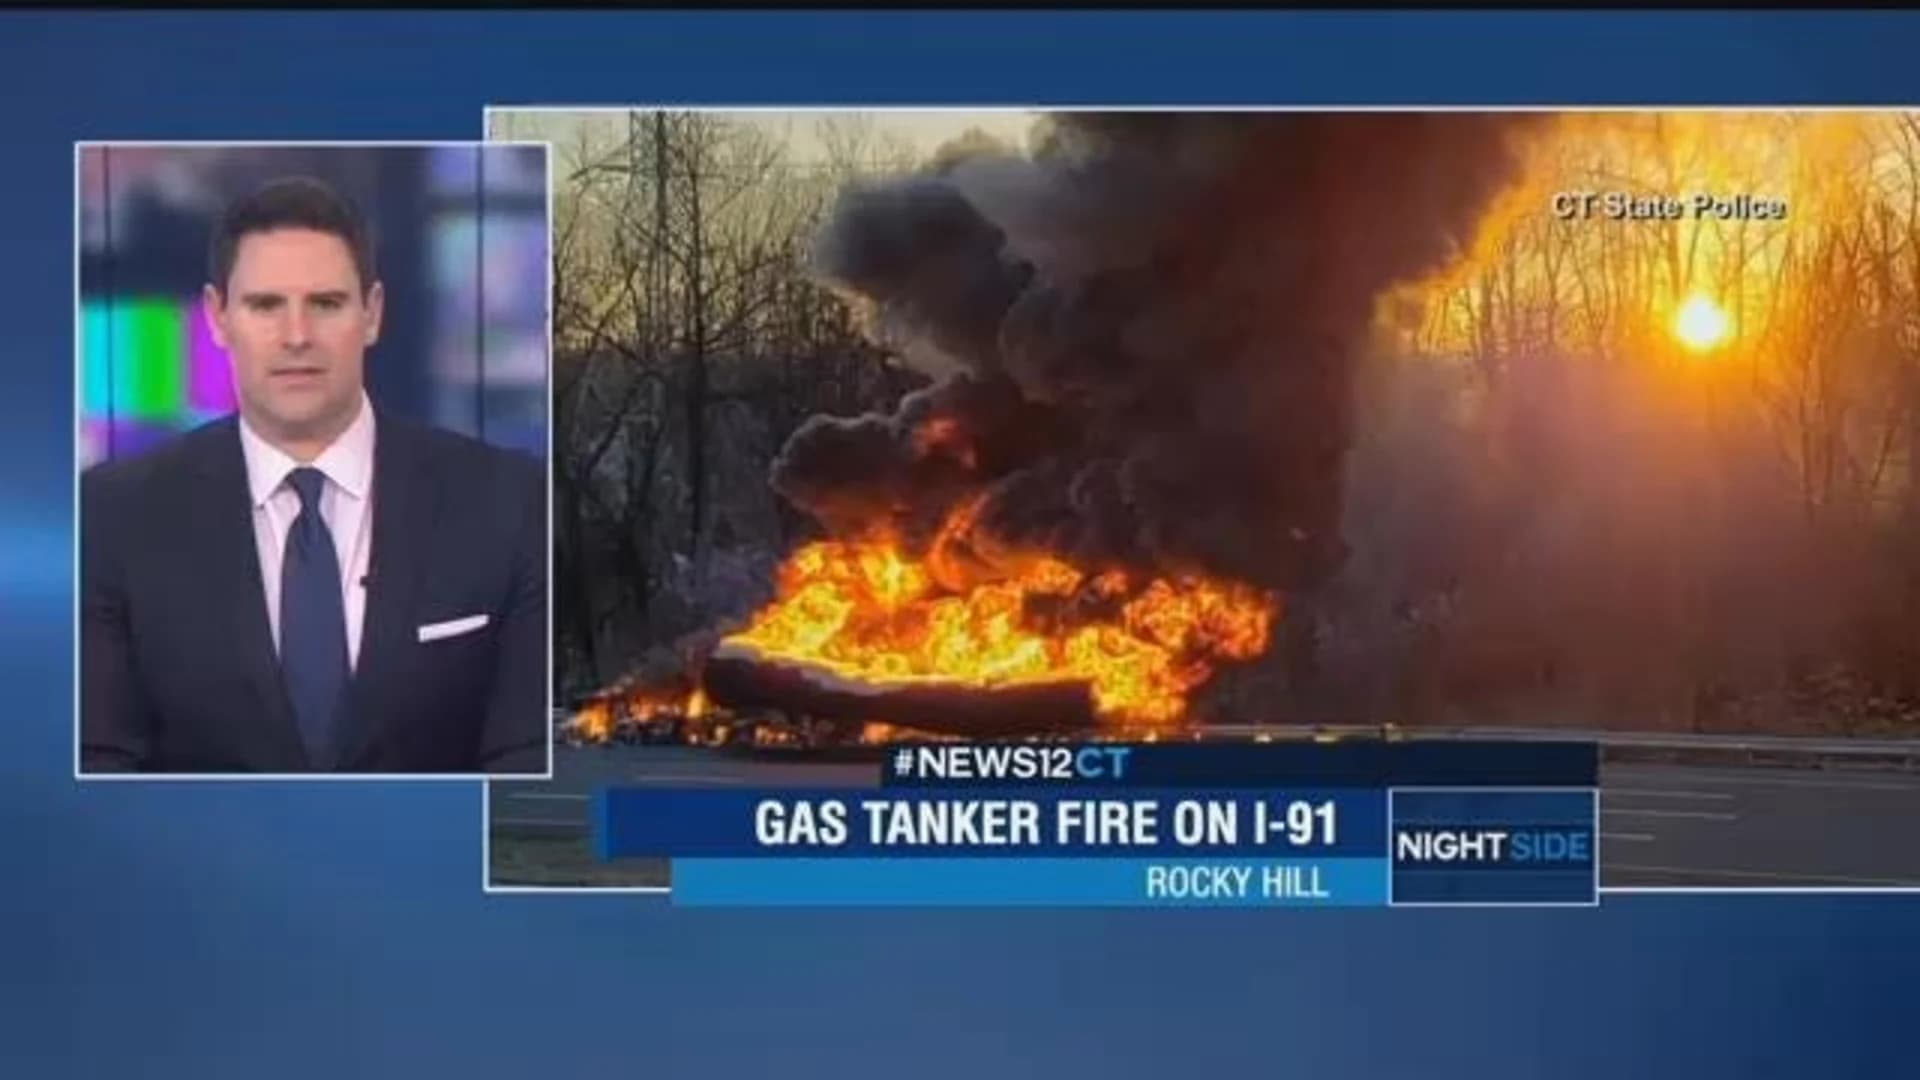 Gas tank fire shuts down I-91 for several hours